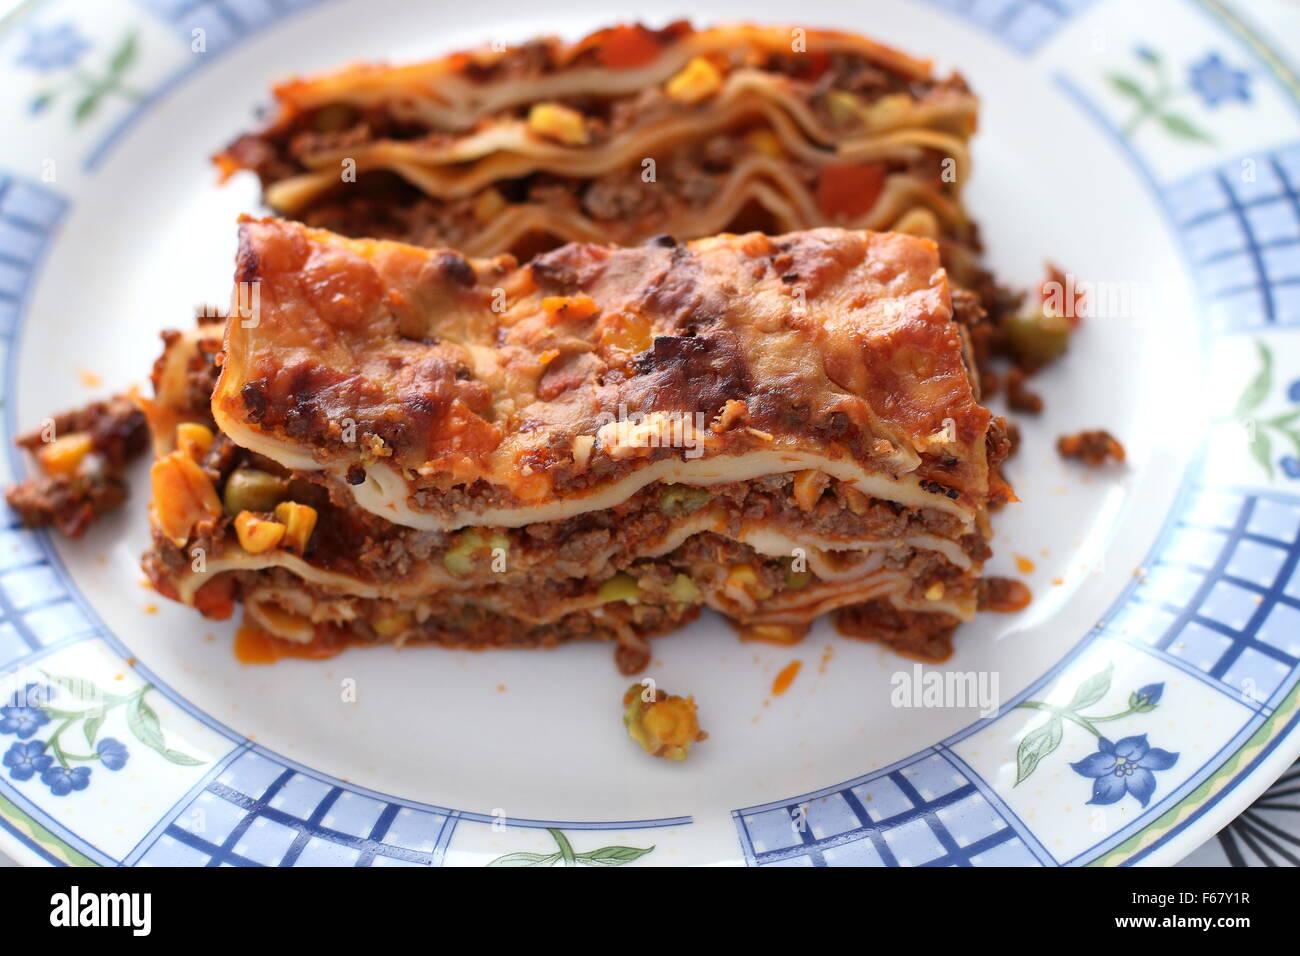 and hi-res meal made Ready stock packet - Alamy photography images